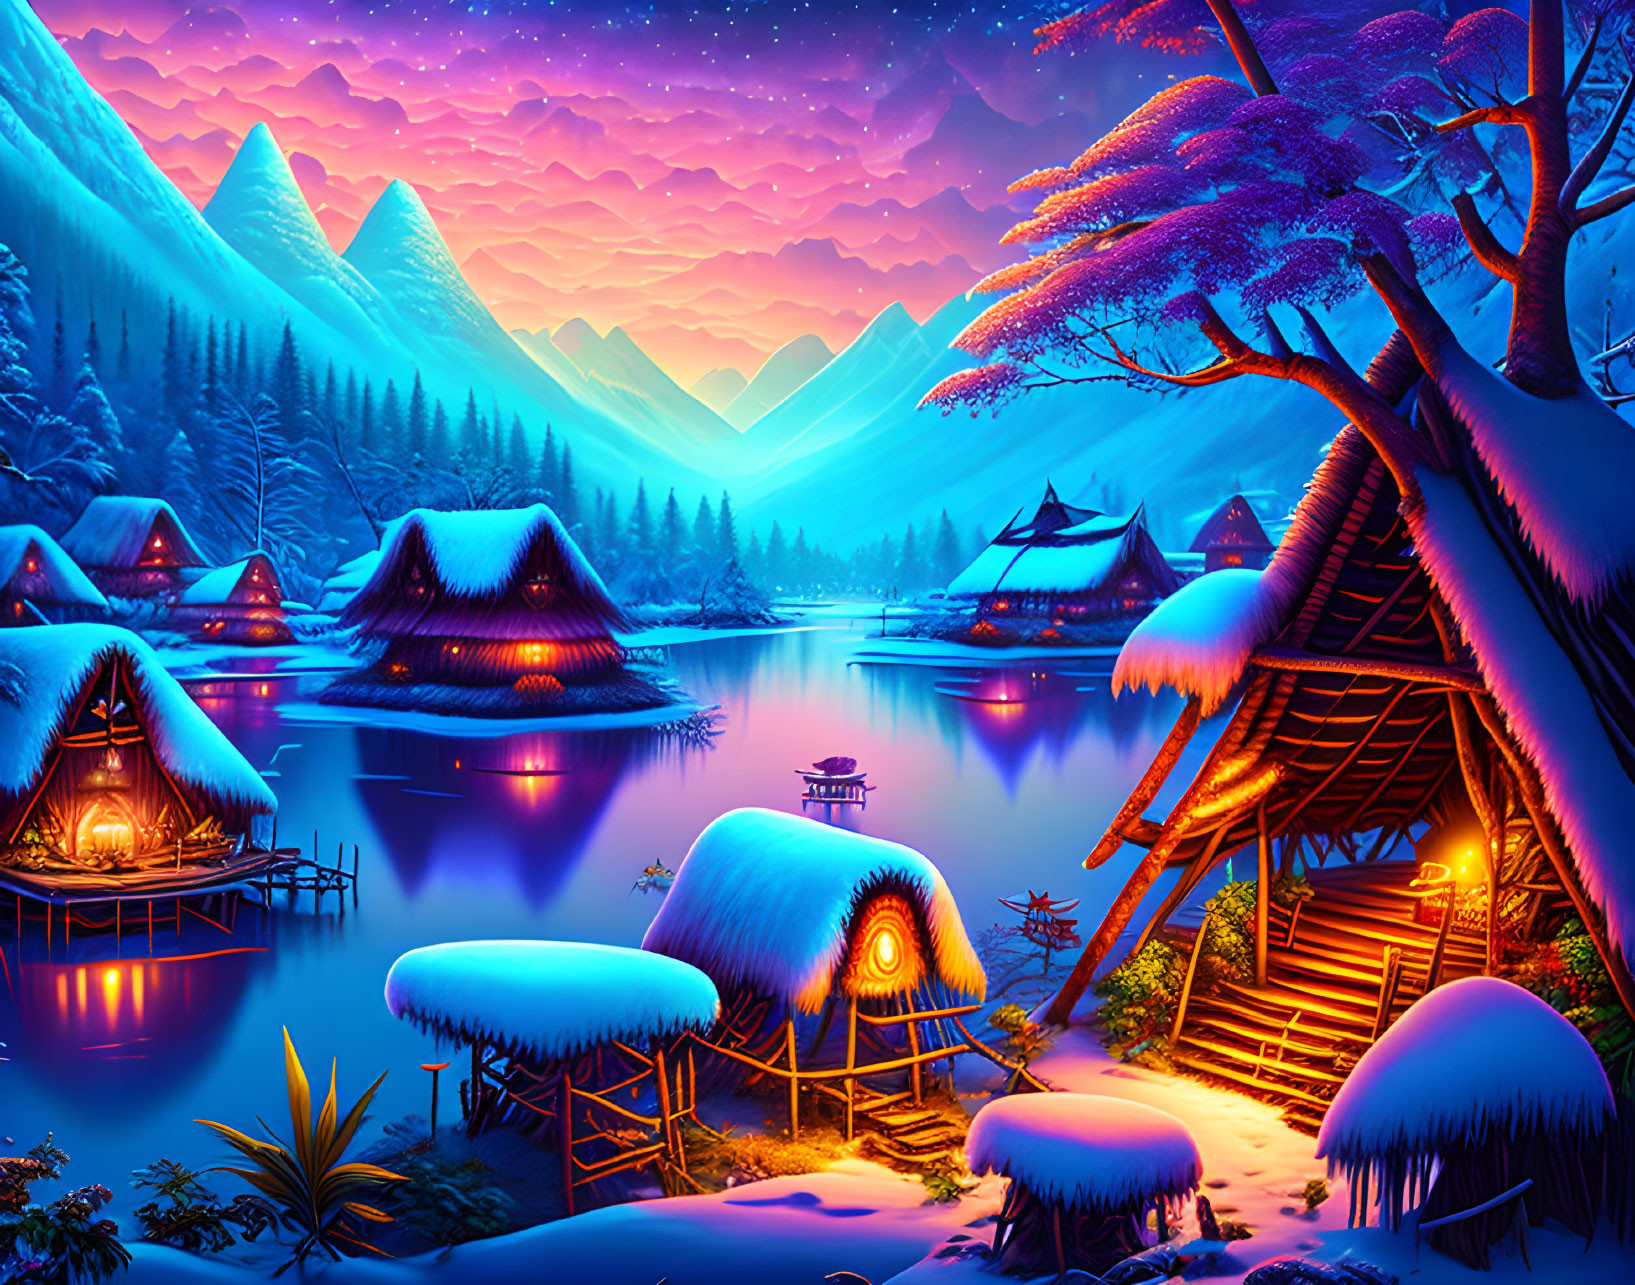 Digital artwork: Tranquil winter night in mountain village with snow-covered huts by calm lake.